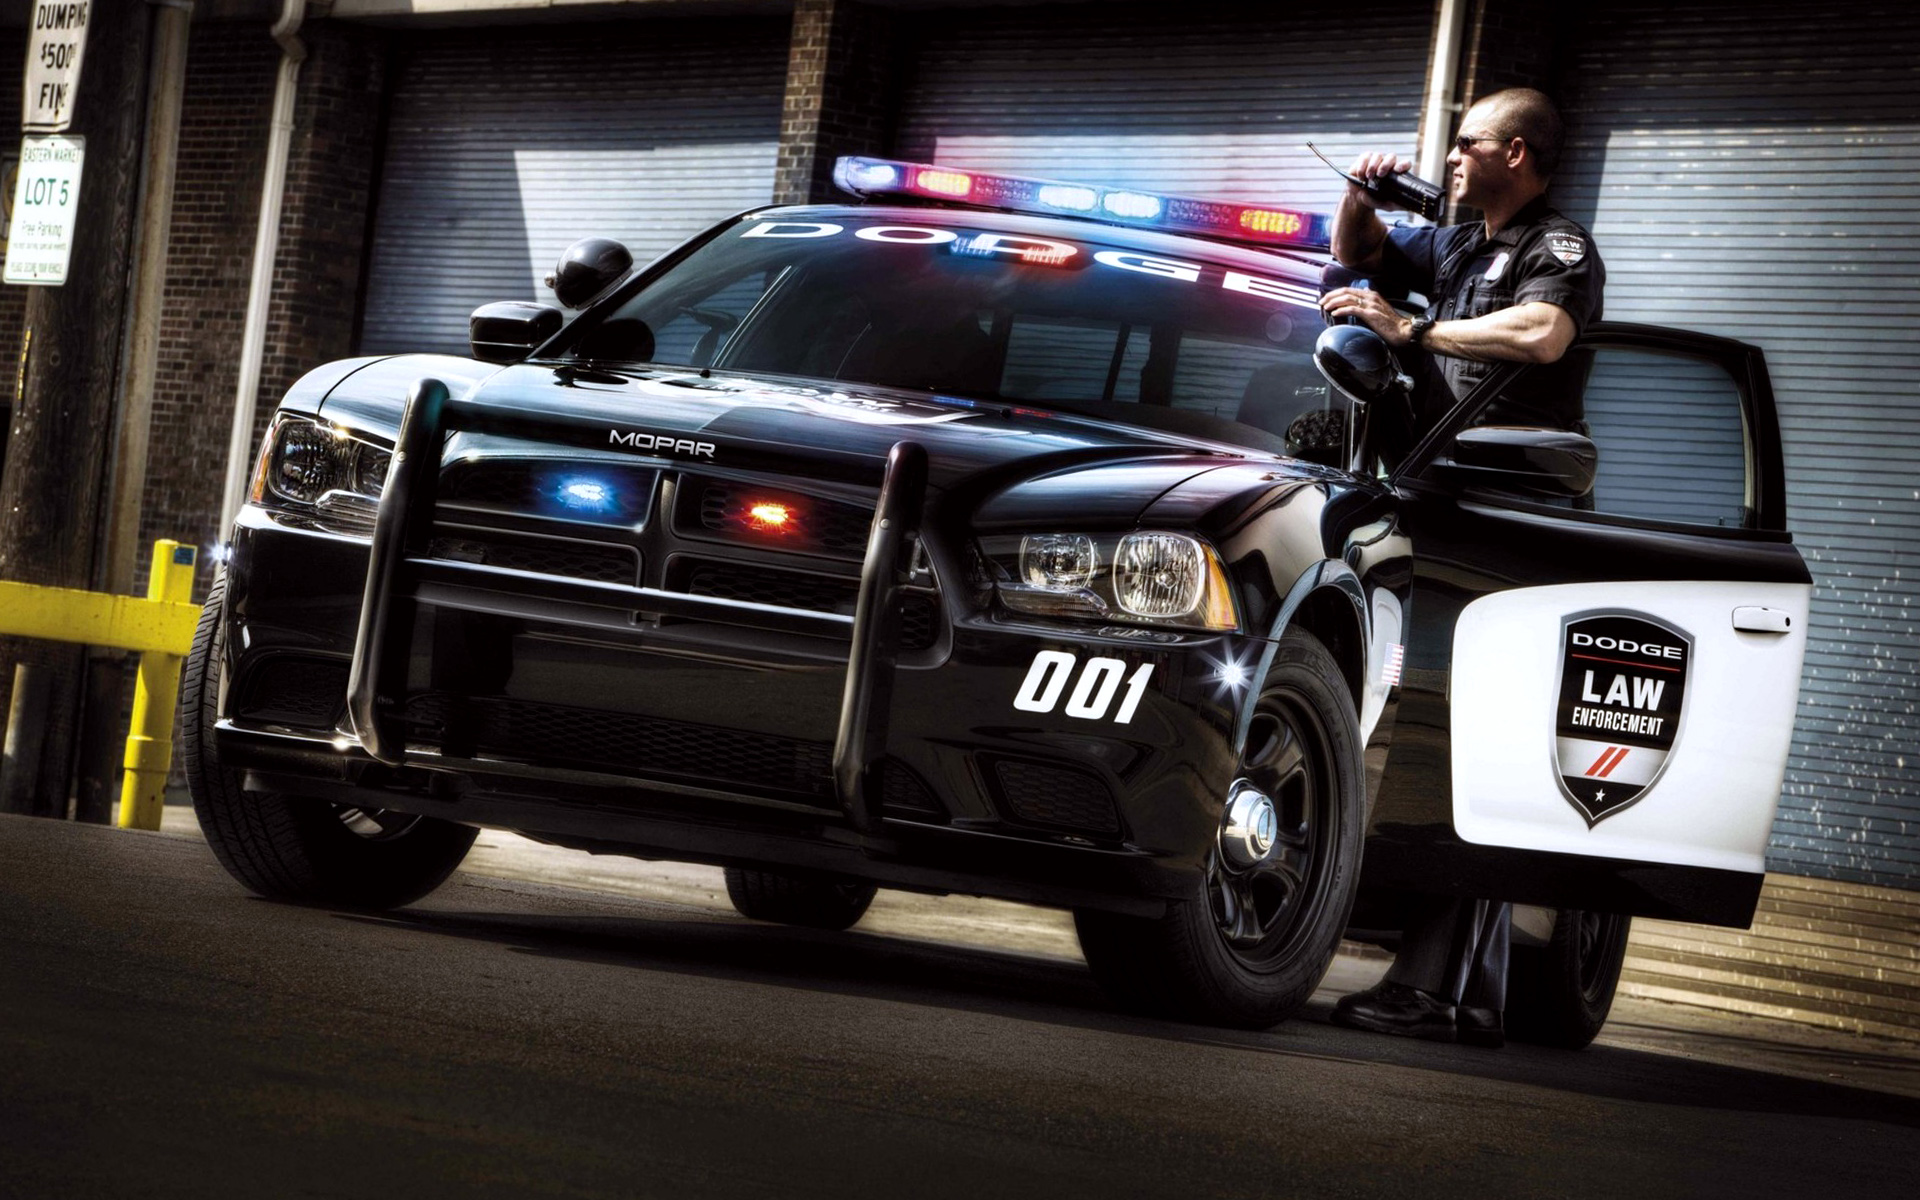 Cool Police Car Action Wallpaper